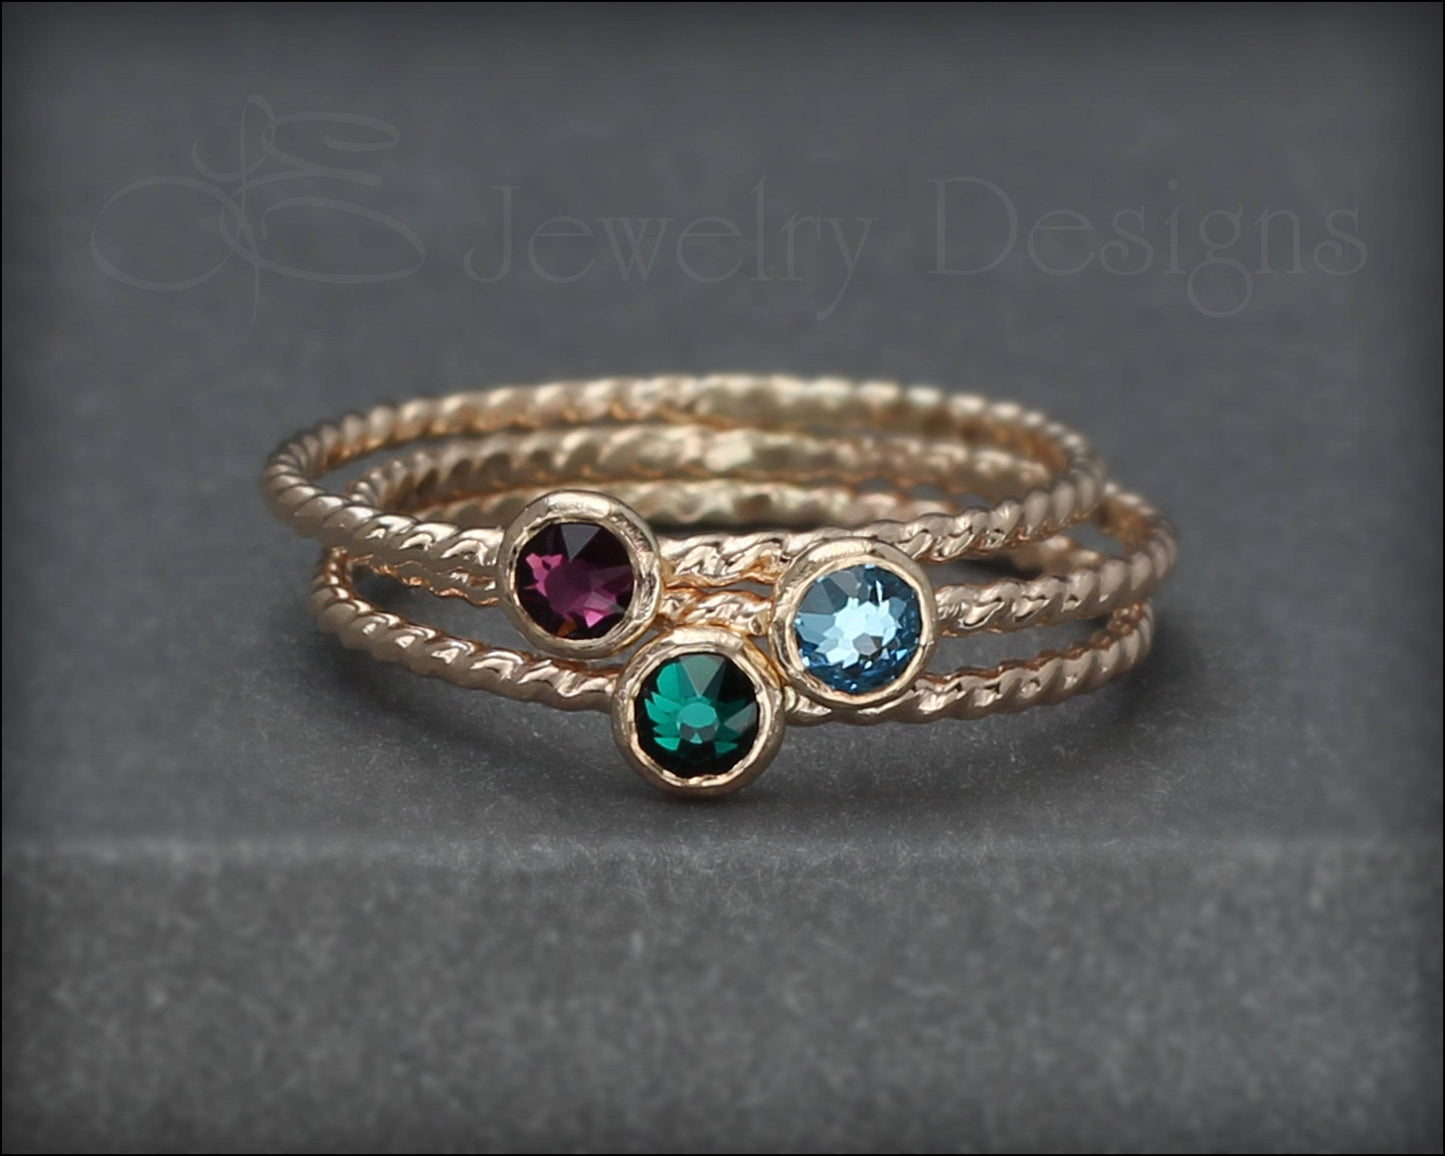 Twisted Birthstone Ring (silver, gold, rose gold) - LE Jewelry Designs